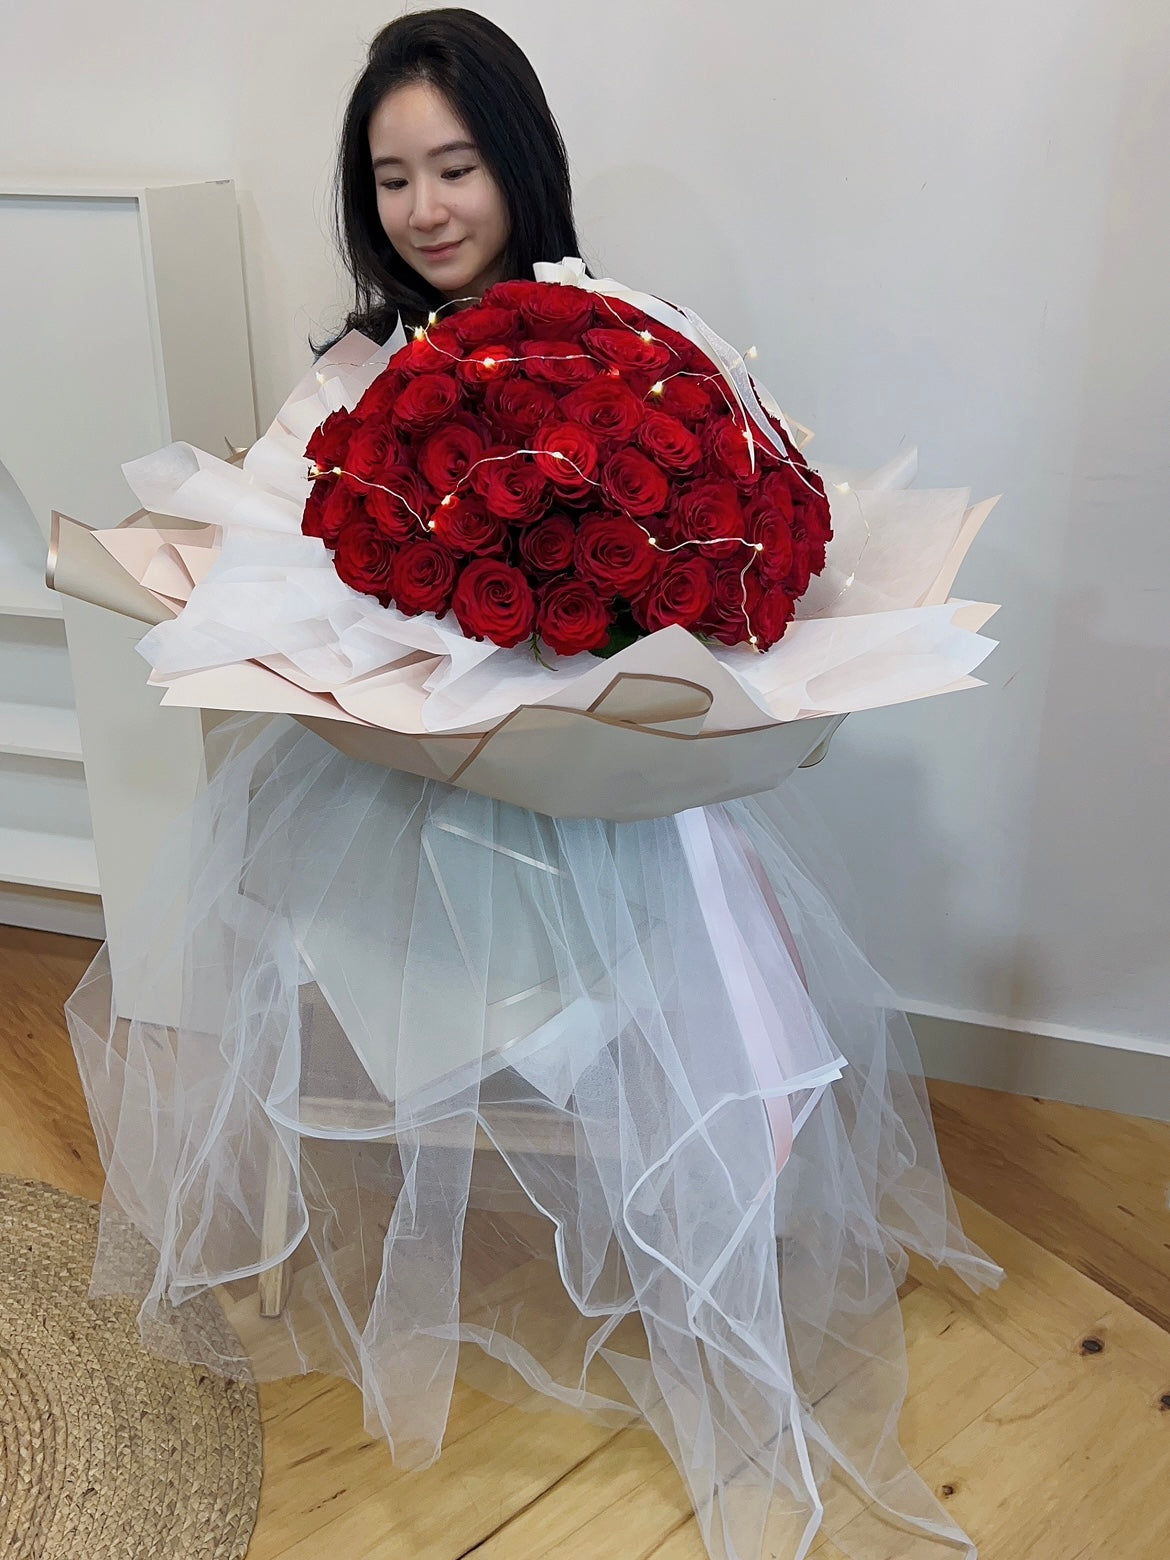 99 Roses Bouquet - Deeply in Love